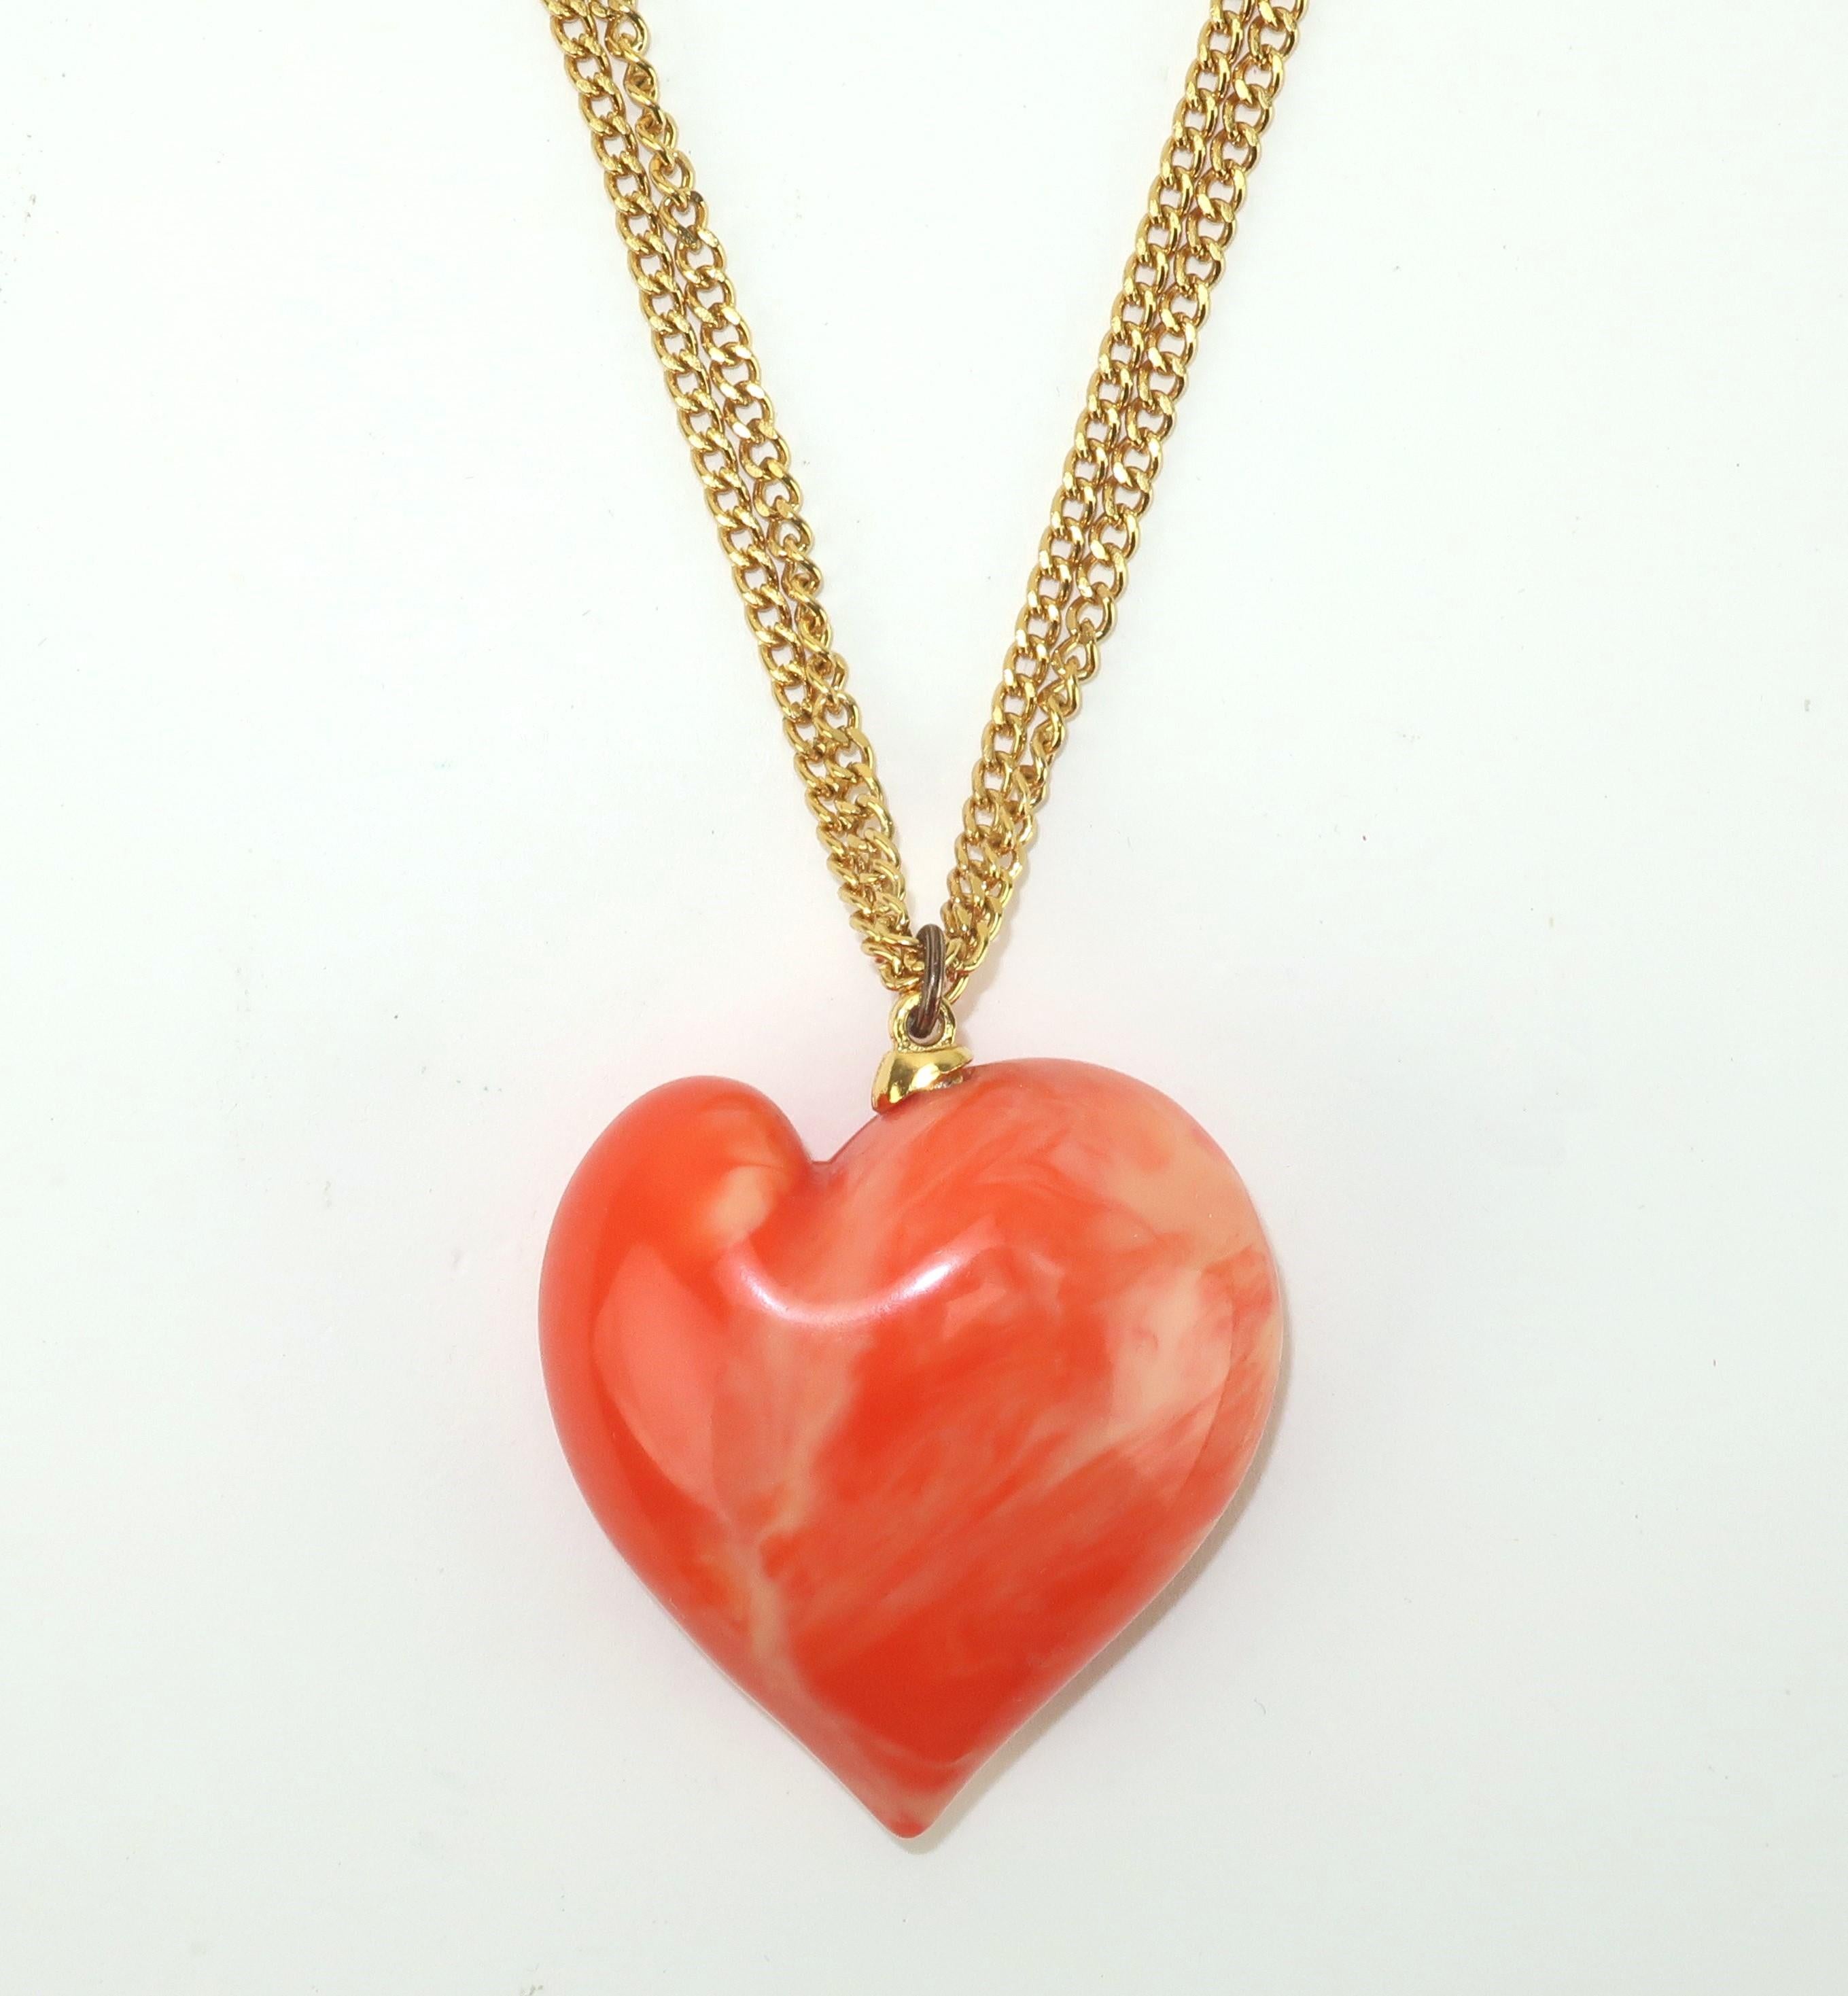 1980's Kenneth Jay Lane pendant necklace with doubled gold tone link chain.  The large heart shaped resin pendant is a real stand out in a vibrant coral color with a marbleized effect.  The long chain is outfitted with a spring ring safety catch and